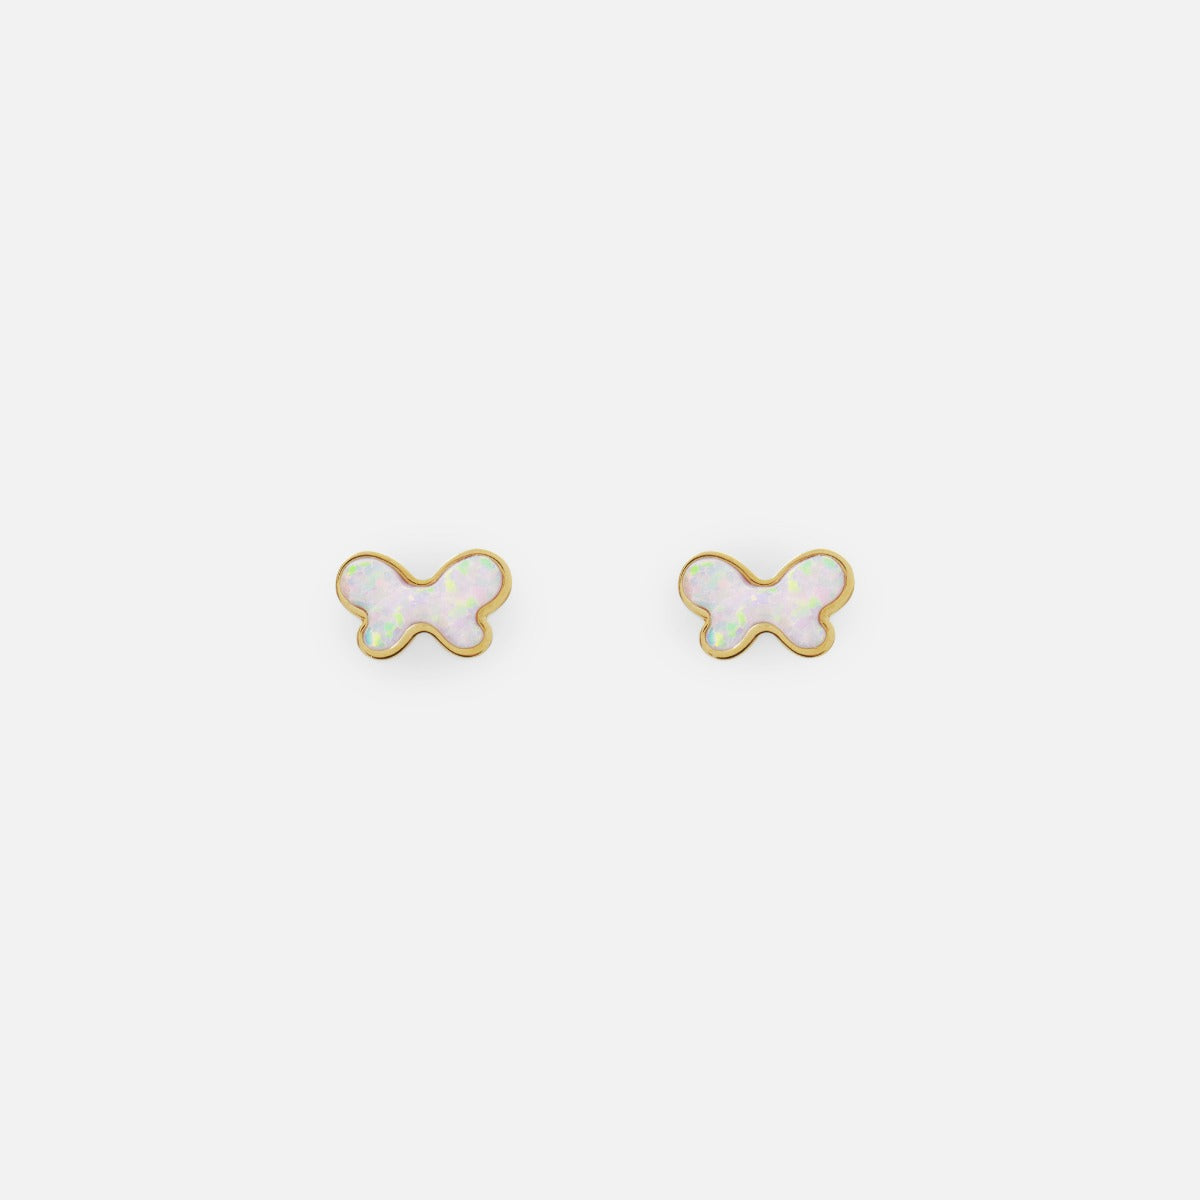 Mini golden stainless steel earrings with white butterfly